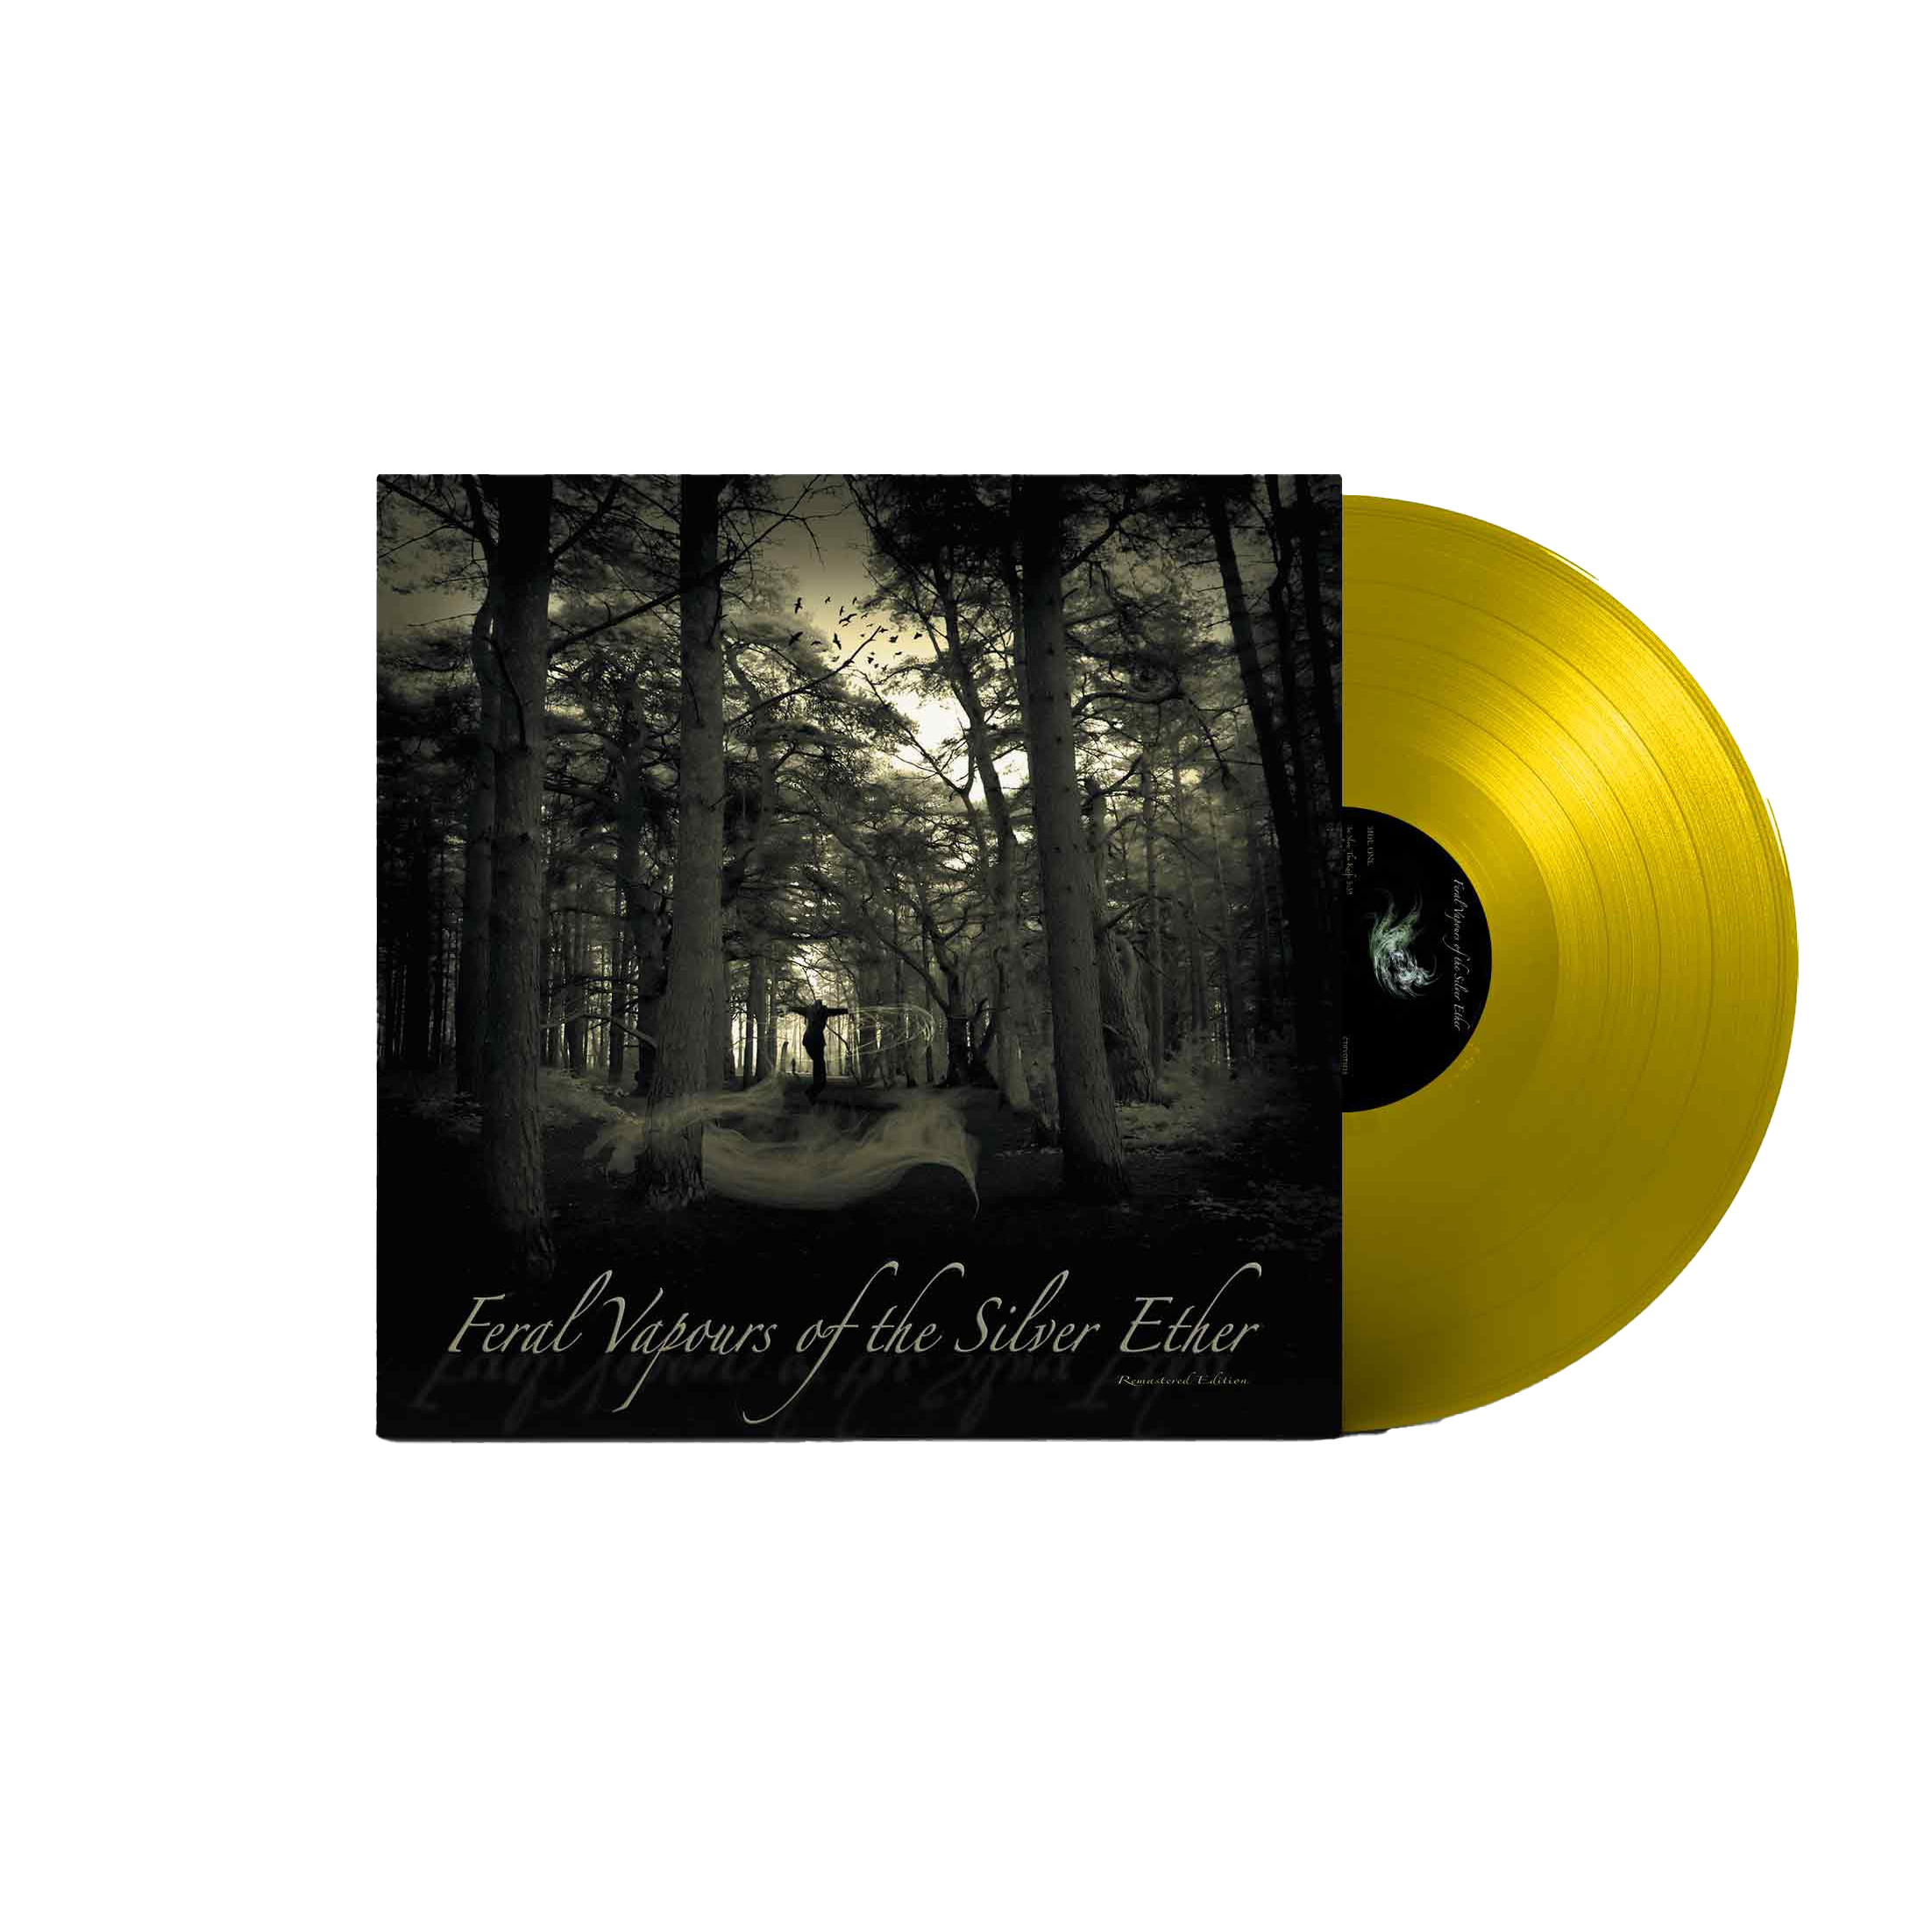 Chris & Cosey - Feral Vapours Of The Silver Ether: Limited Edition Yellow Vinyl LP